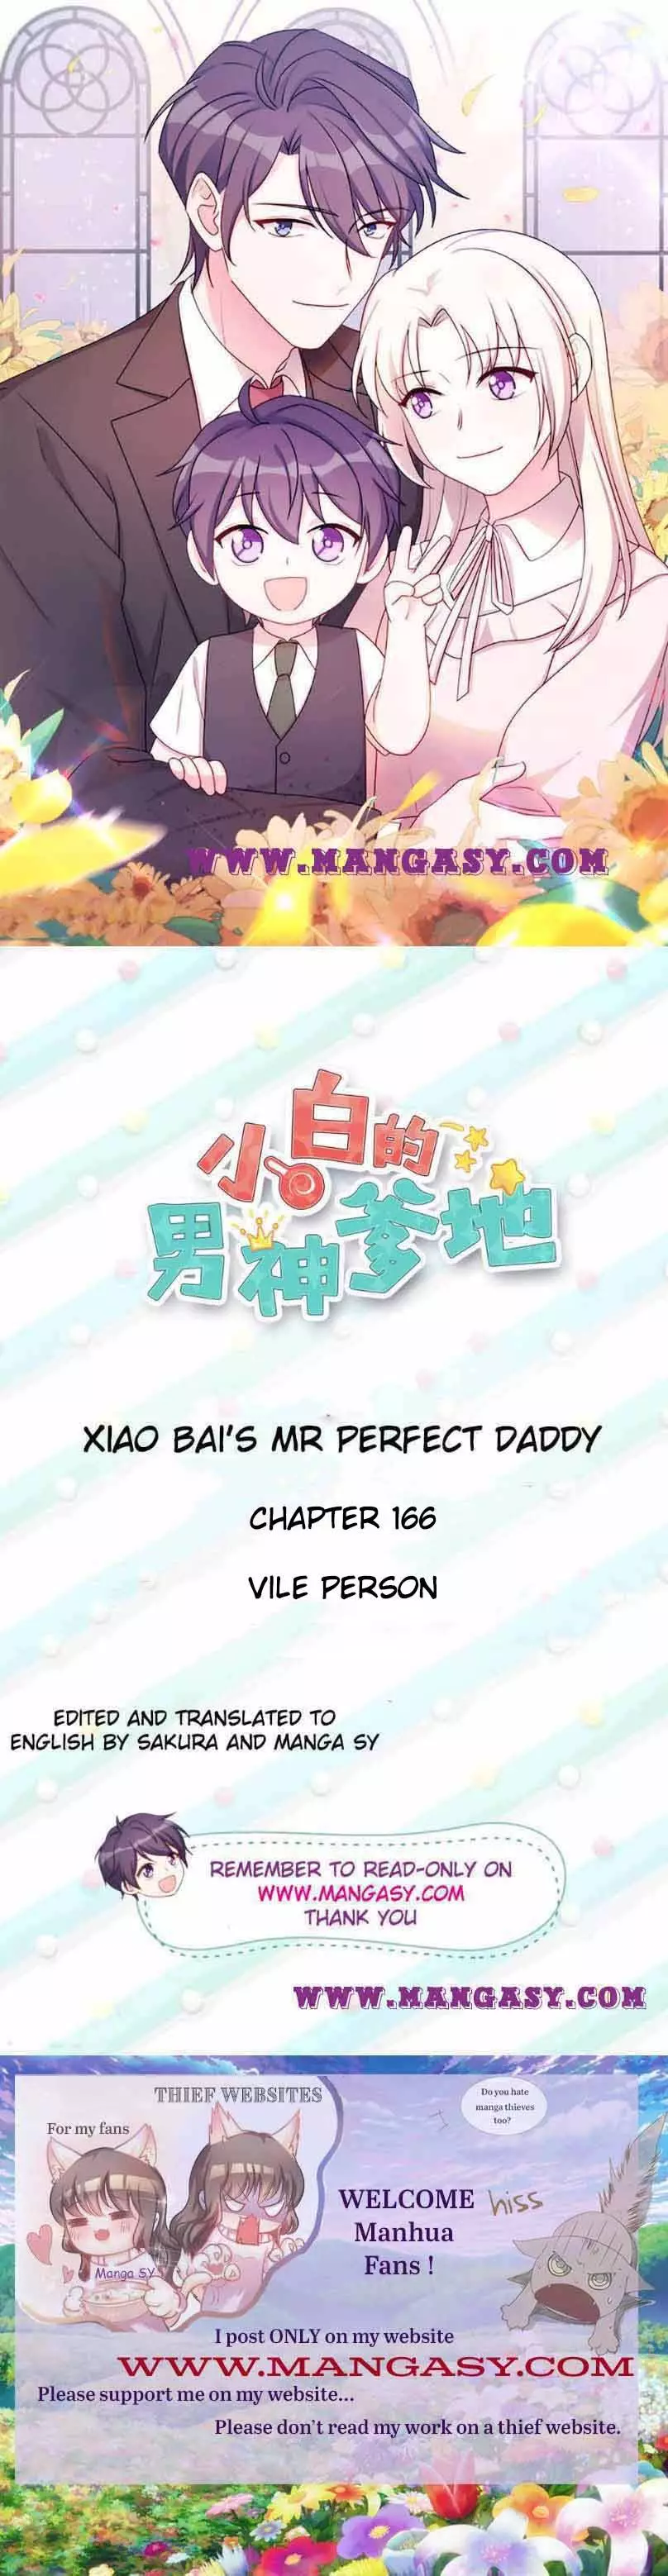 Xiao Bai’S Father Is A Wonderful Person - 166 page 1-77c49fcd